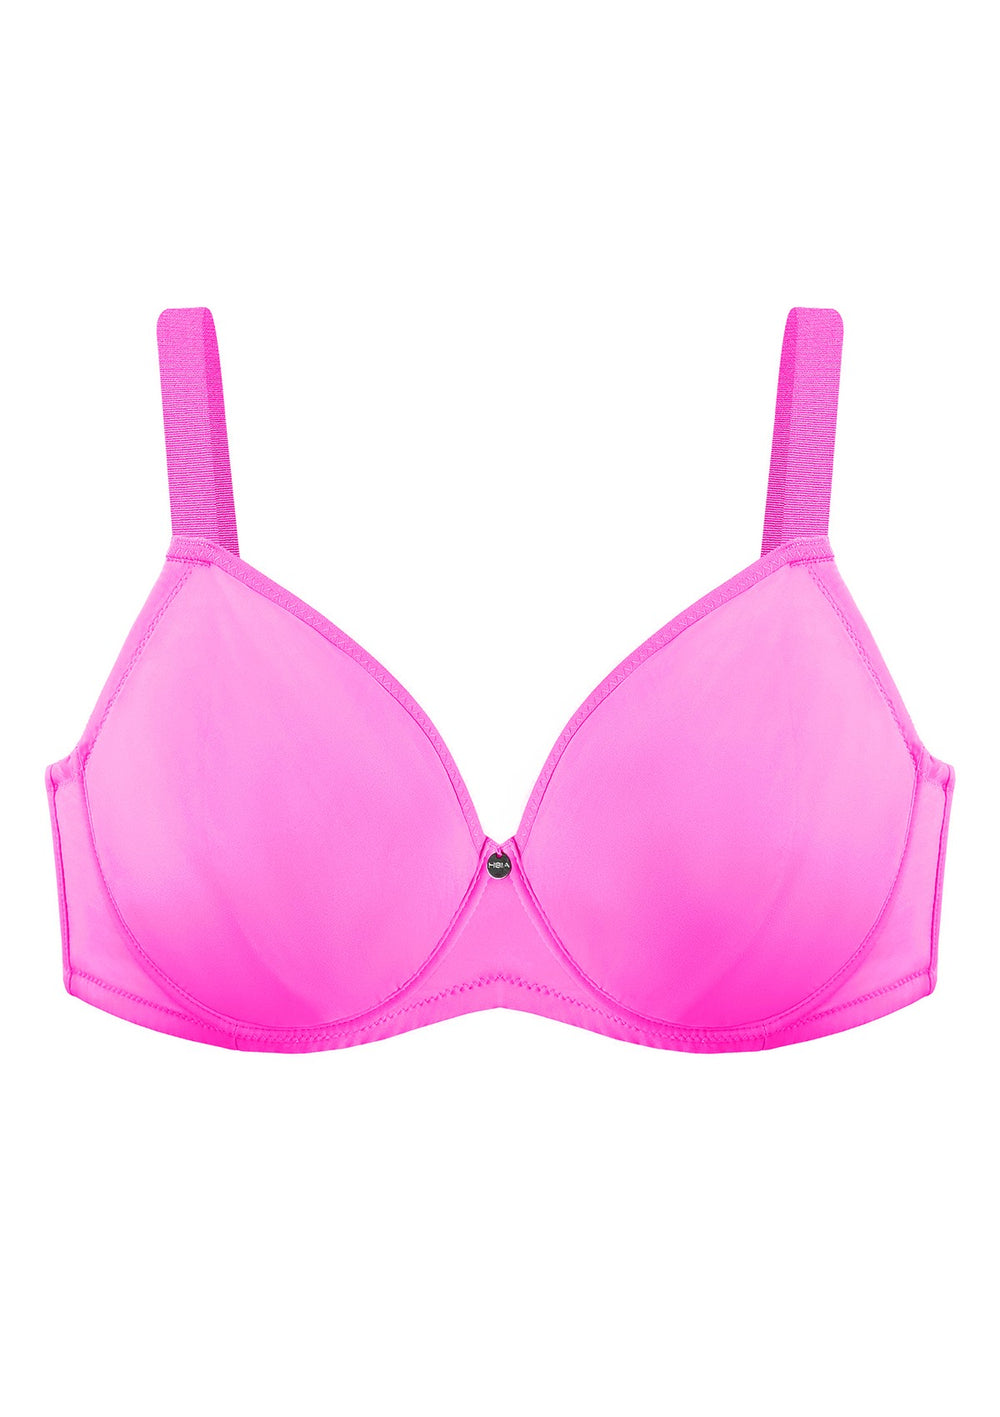 Buy Kica KICA Crostini Removable Padding Moisture Wicking Rapid Dry High  Support Bra at Redfynd